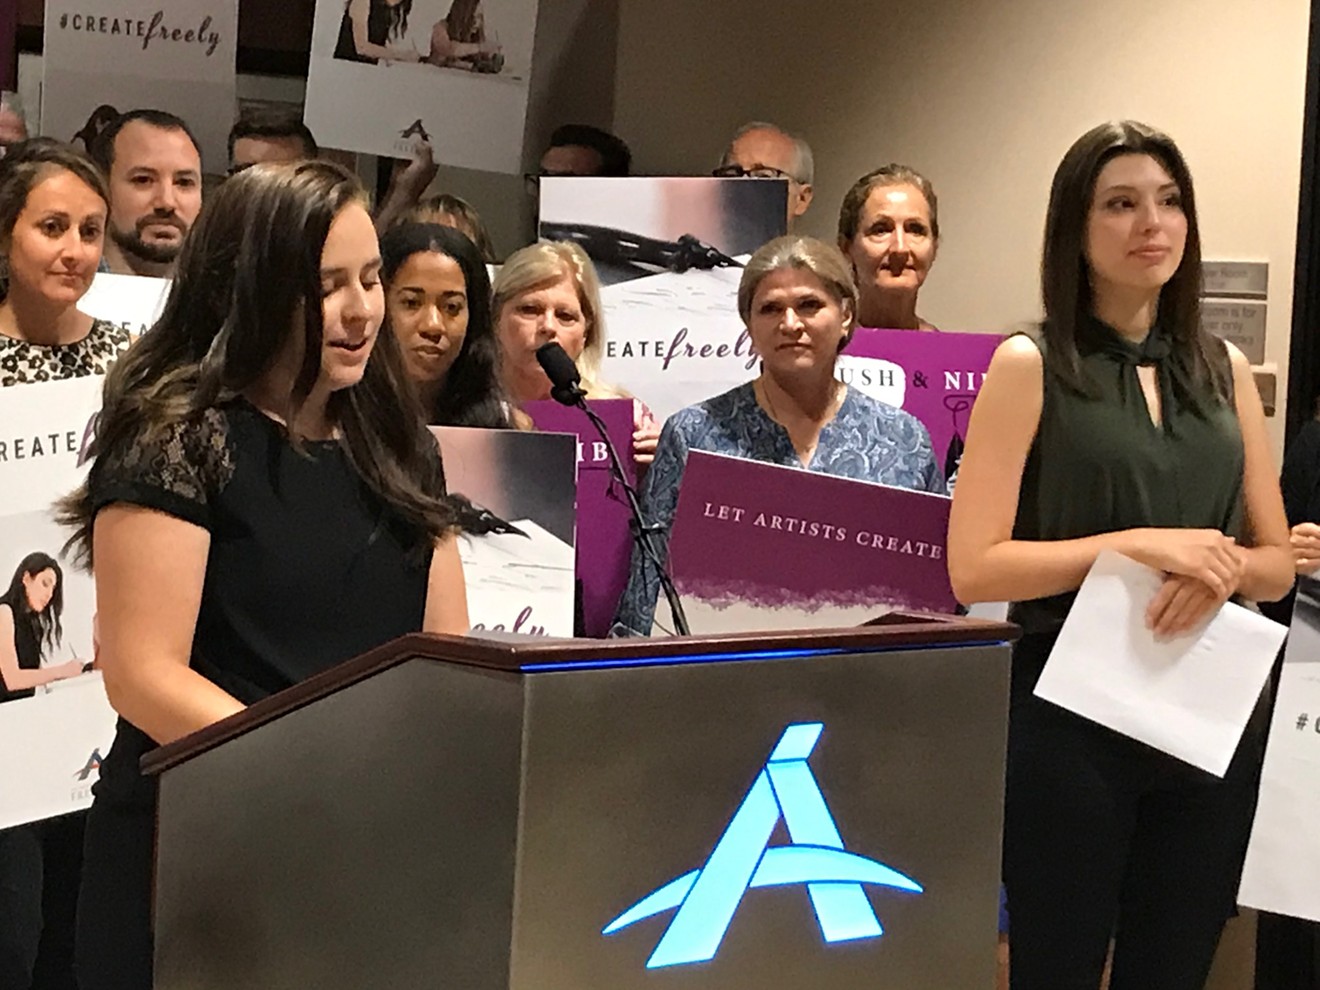 Artist Brianna Koski (at podium) and calligrapher Joanna Duka (right) talk about the ruling at Alliance Defending Freedom's Scottsdale office.